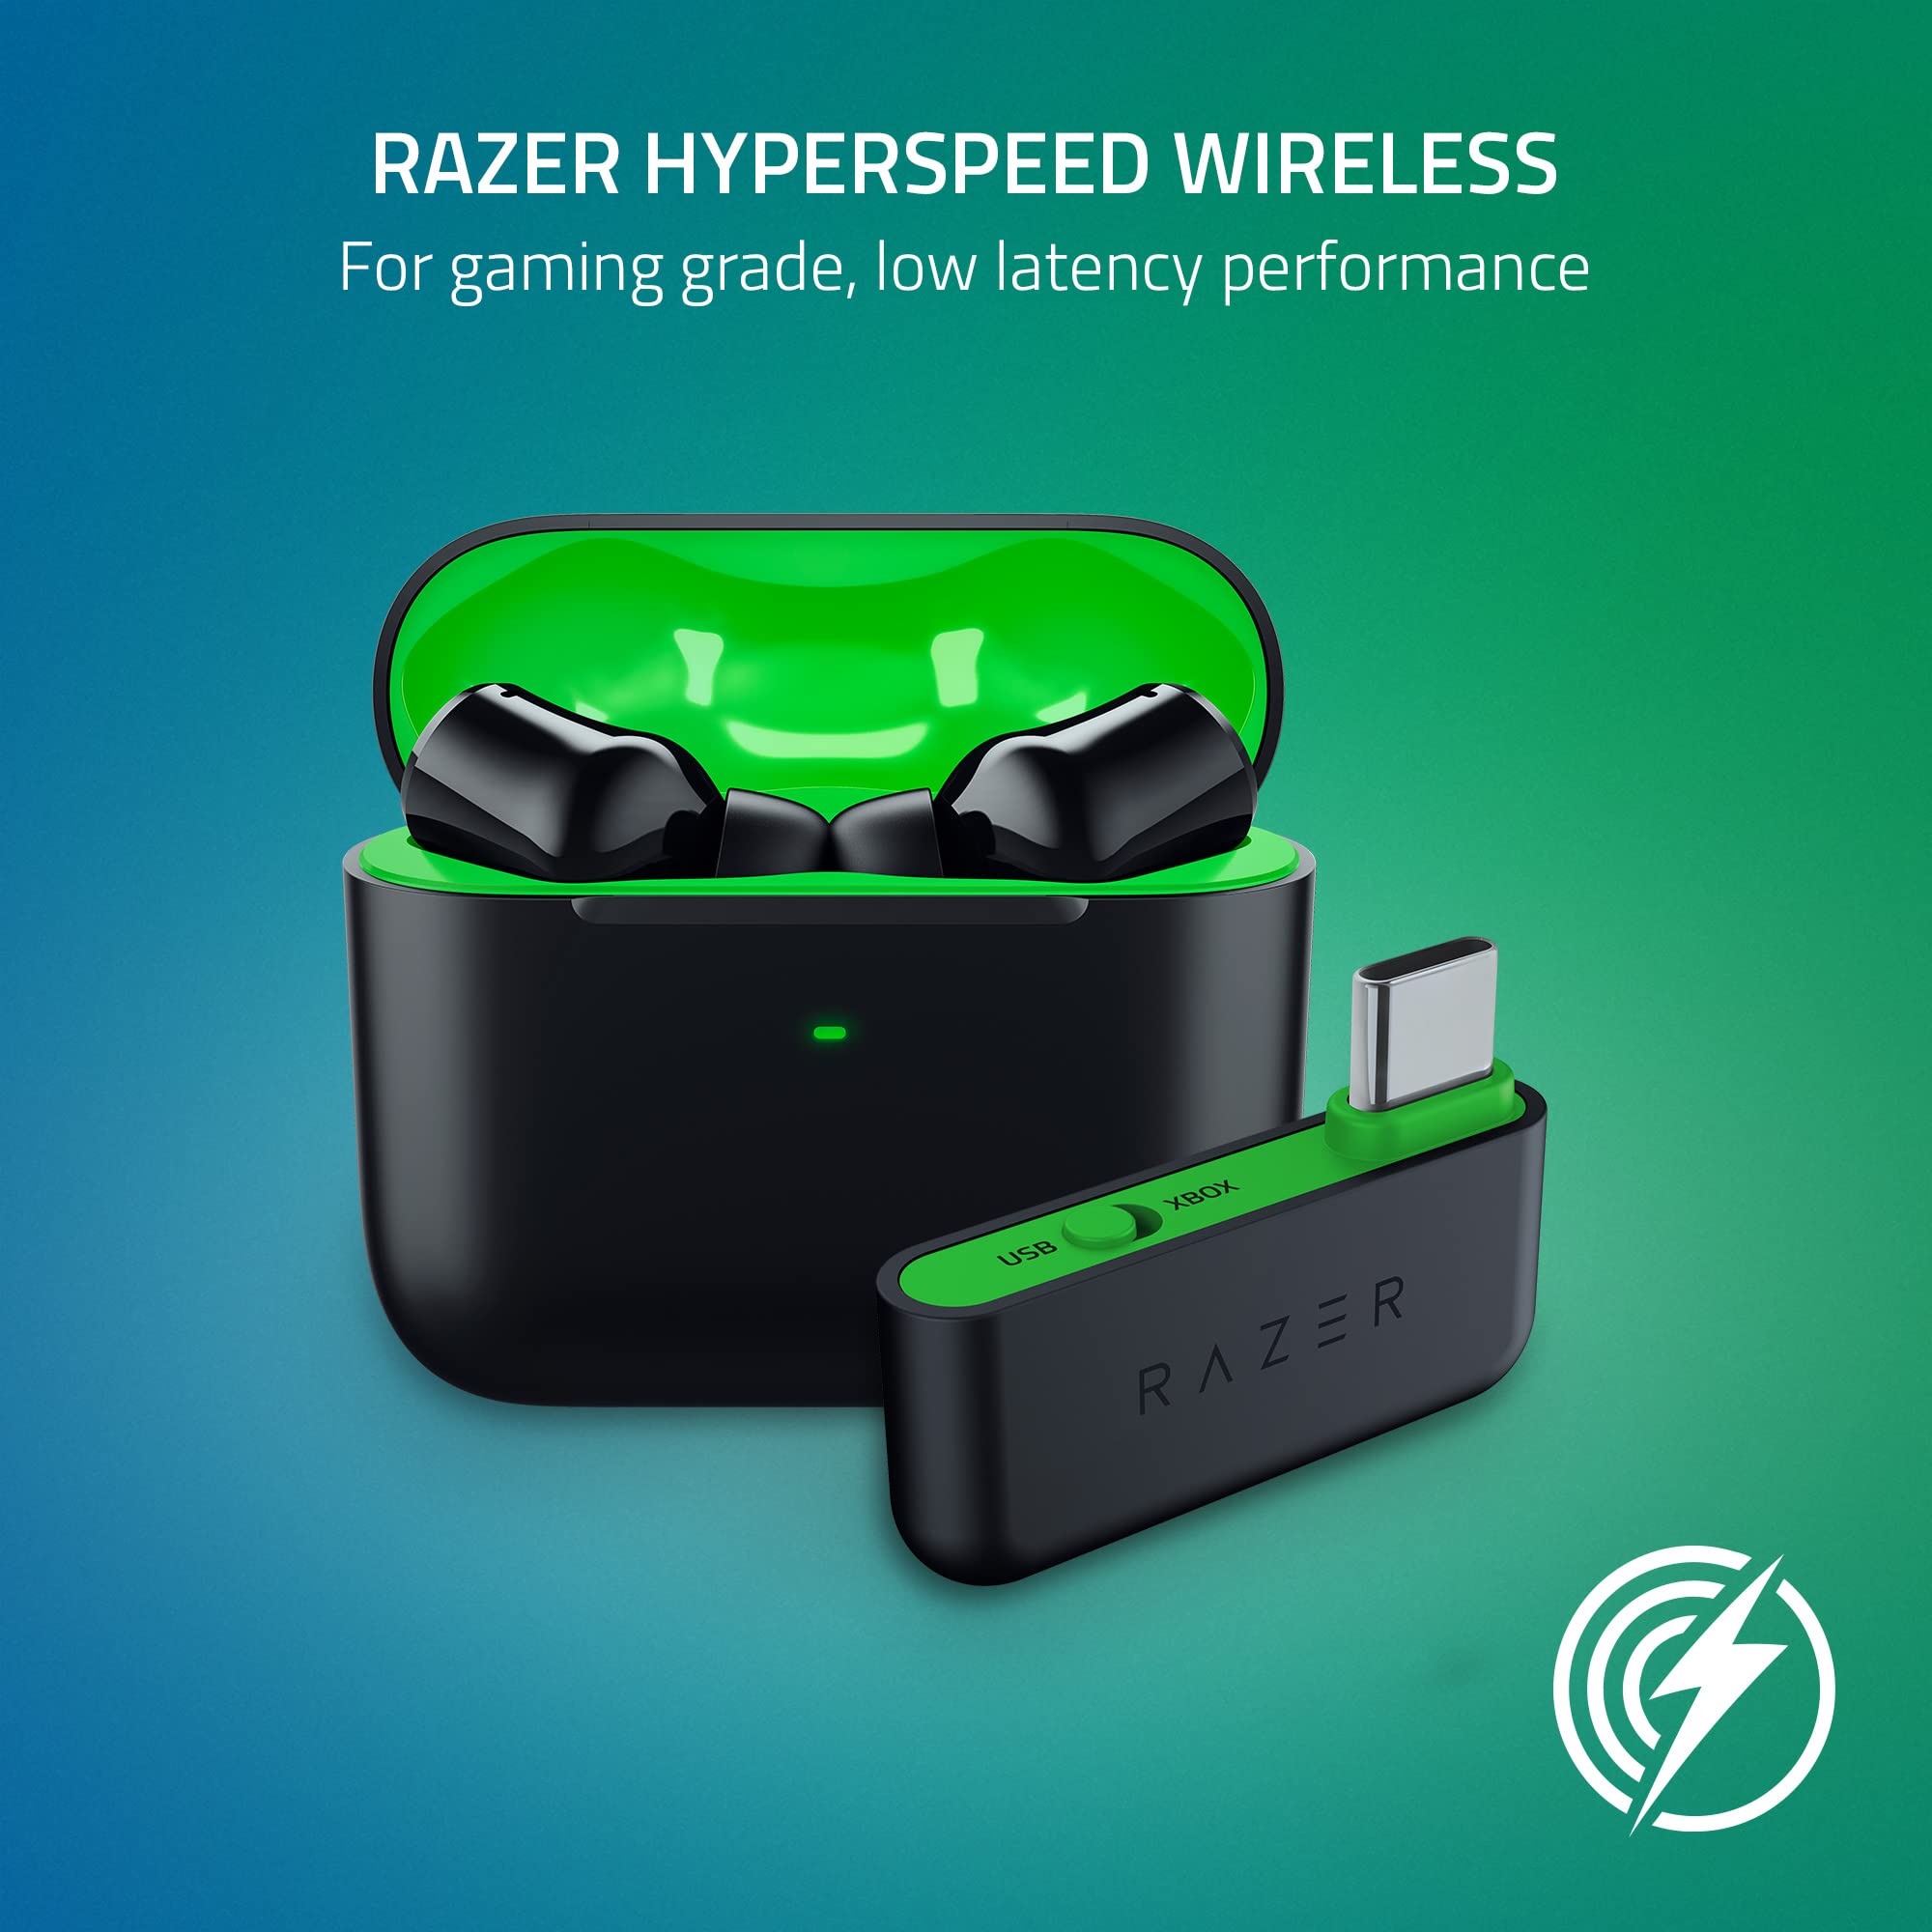 Razer Hammerhead HyperSpeed Wireless Multi-Platform Gaming Earbuds for Xbox Series X|S, Xbox One, PC, Mobile: ANC - Noise Cancelling Mic - Bluetooth 5.2 - RGB Chroma - 30 Hr Battery